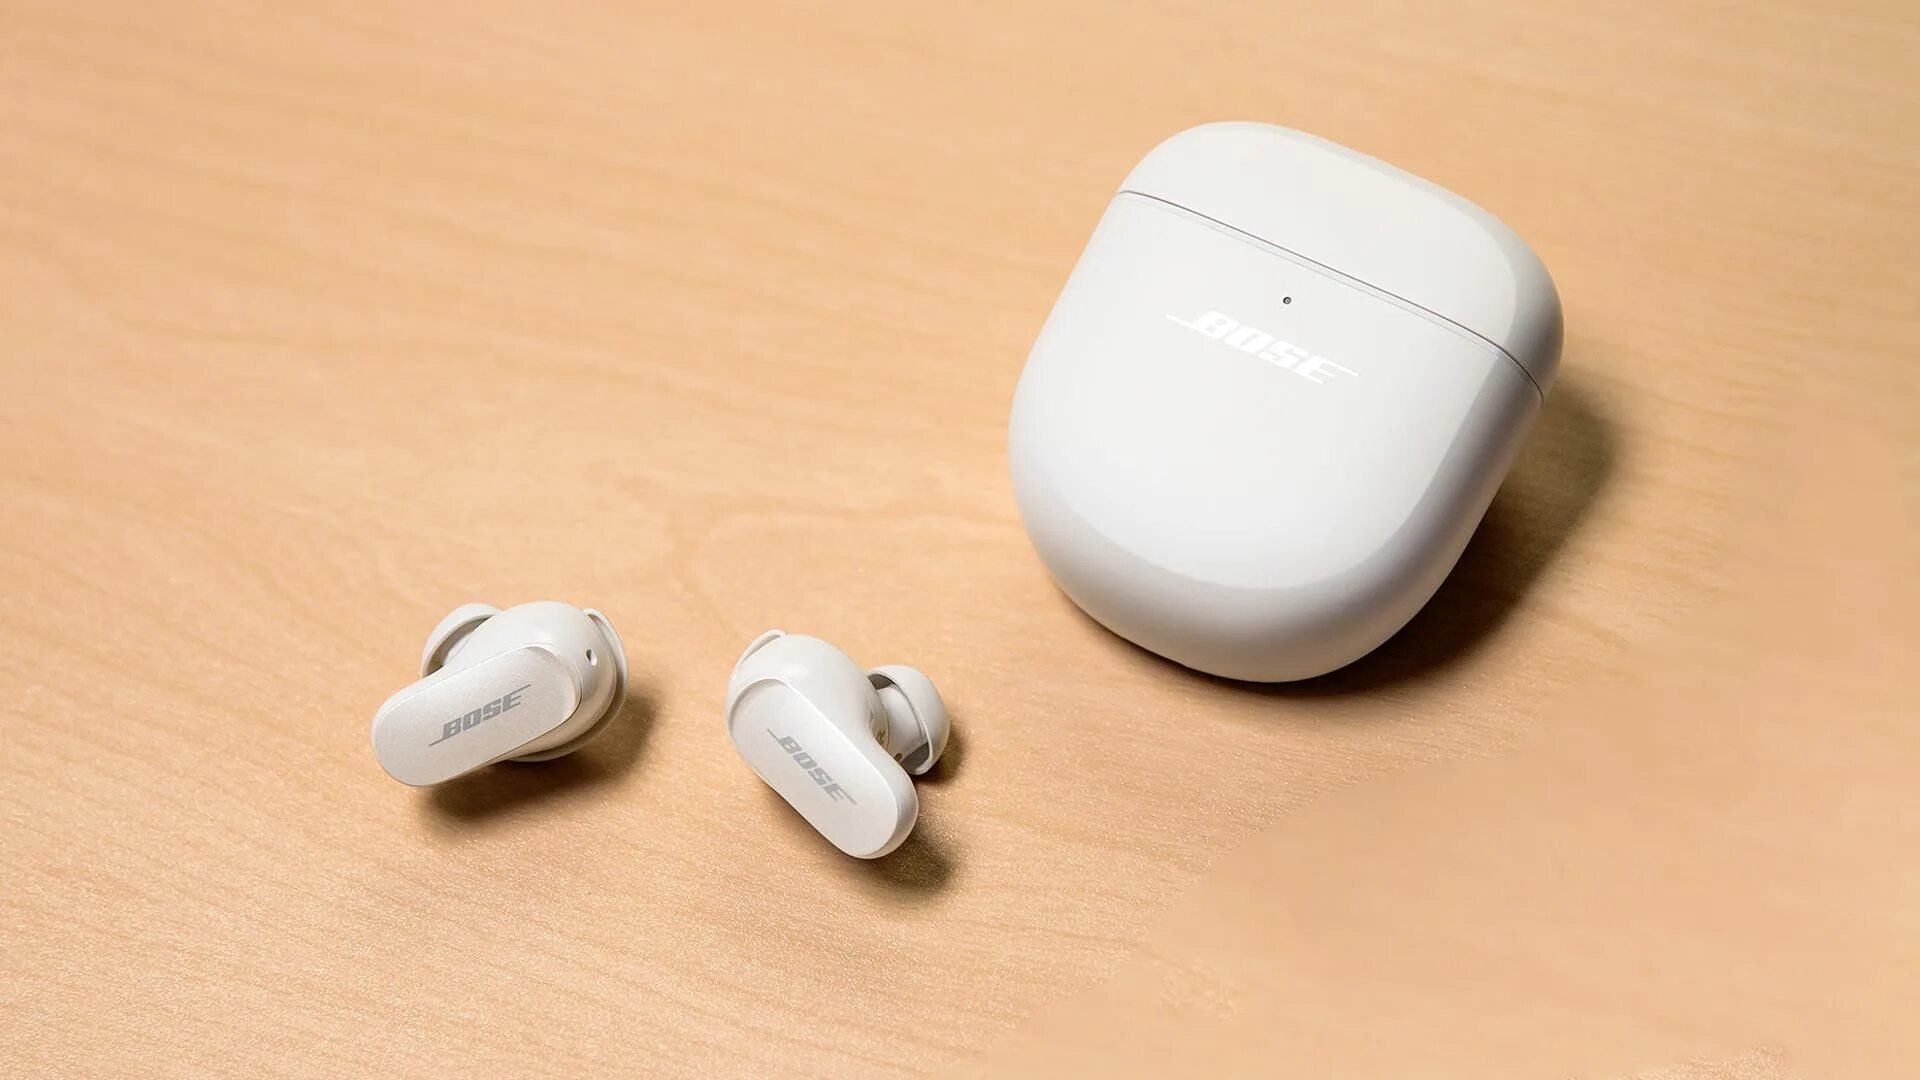 Bose earbuds 2. Bose QC Earbuds. Bose QUIETCOMFORT Earbuds. AIRPODS Pro 2.